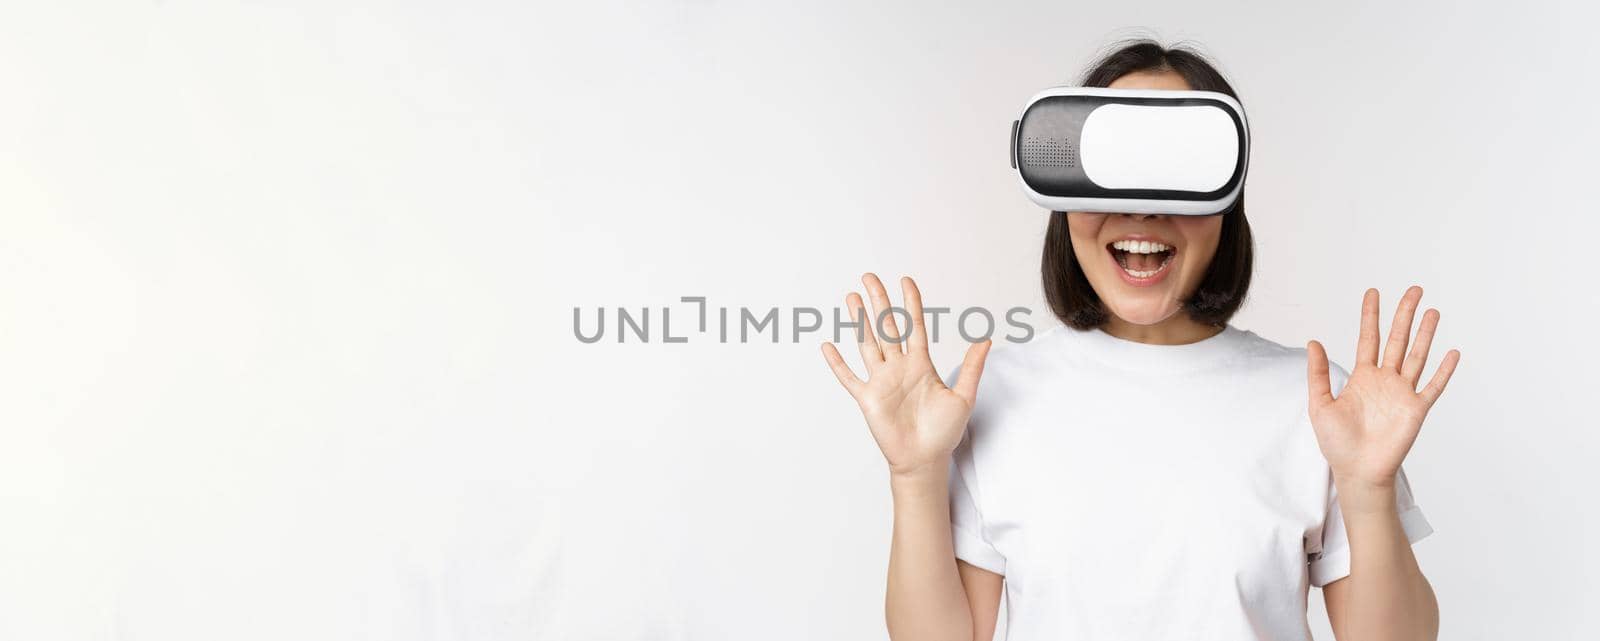 Happy asian woman using VR headset, waving raised hands and laughing, using virtual reality glasses, standing over white background.